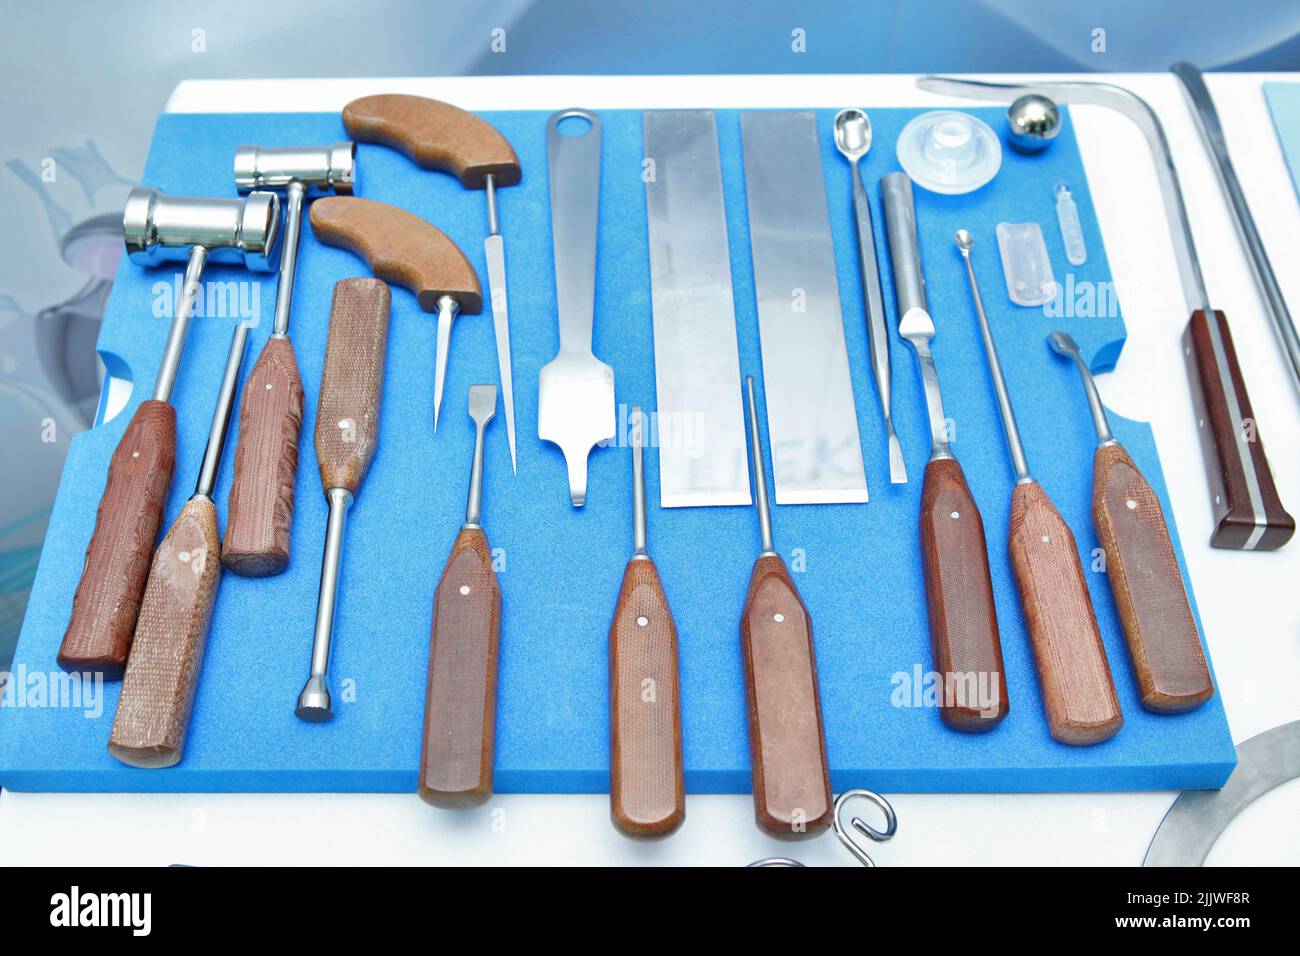 Exhibition of orthopedic instruments. A unique and sophisticated